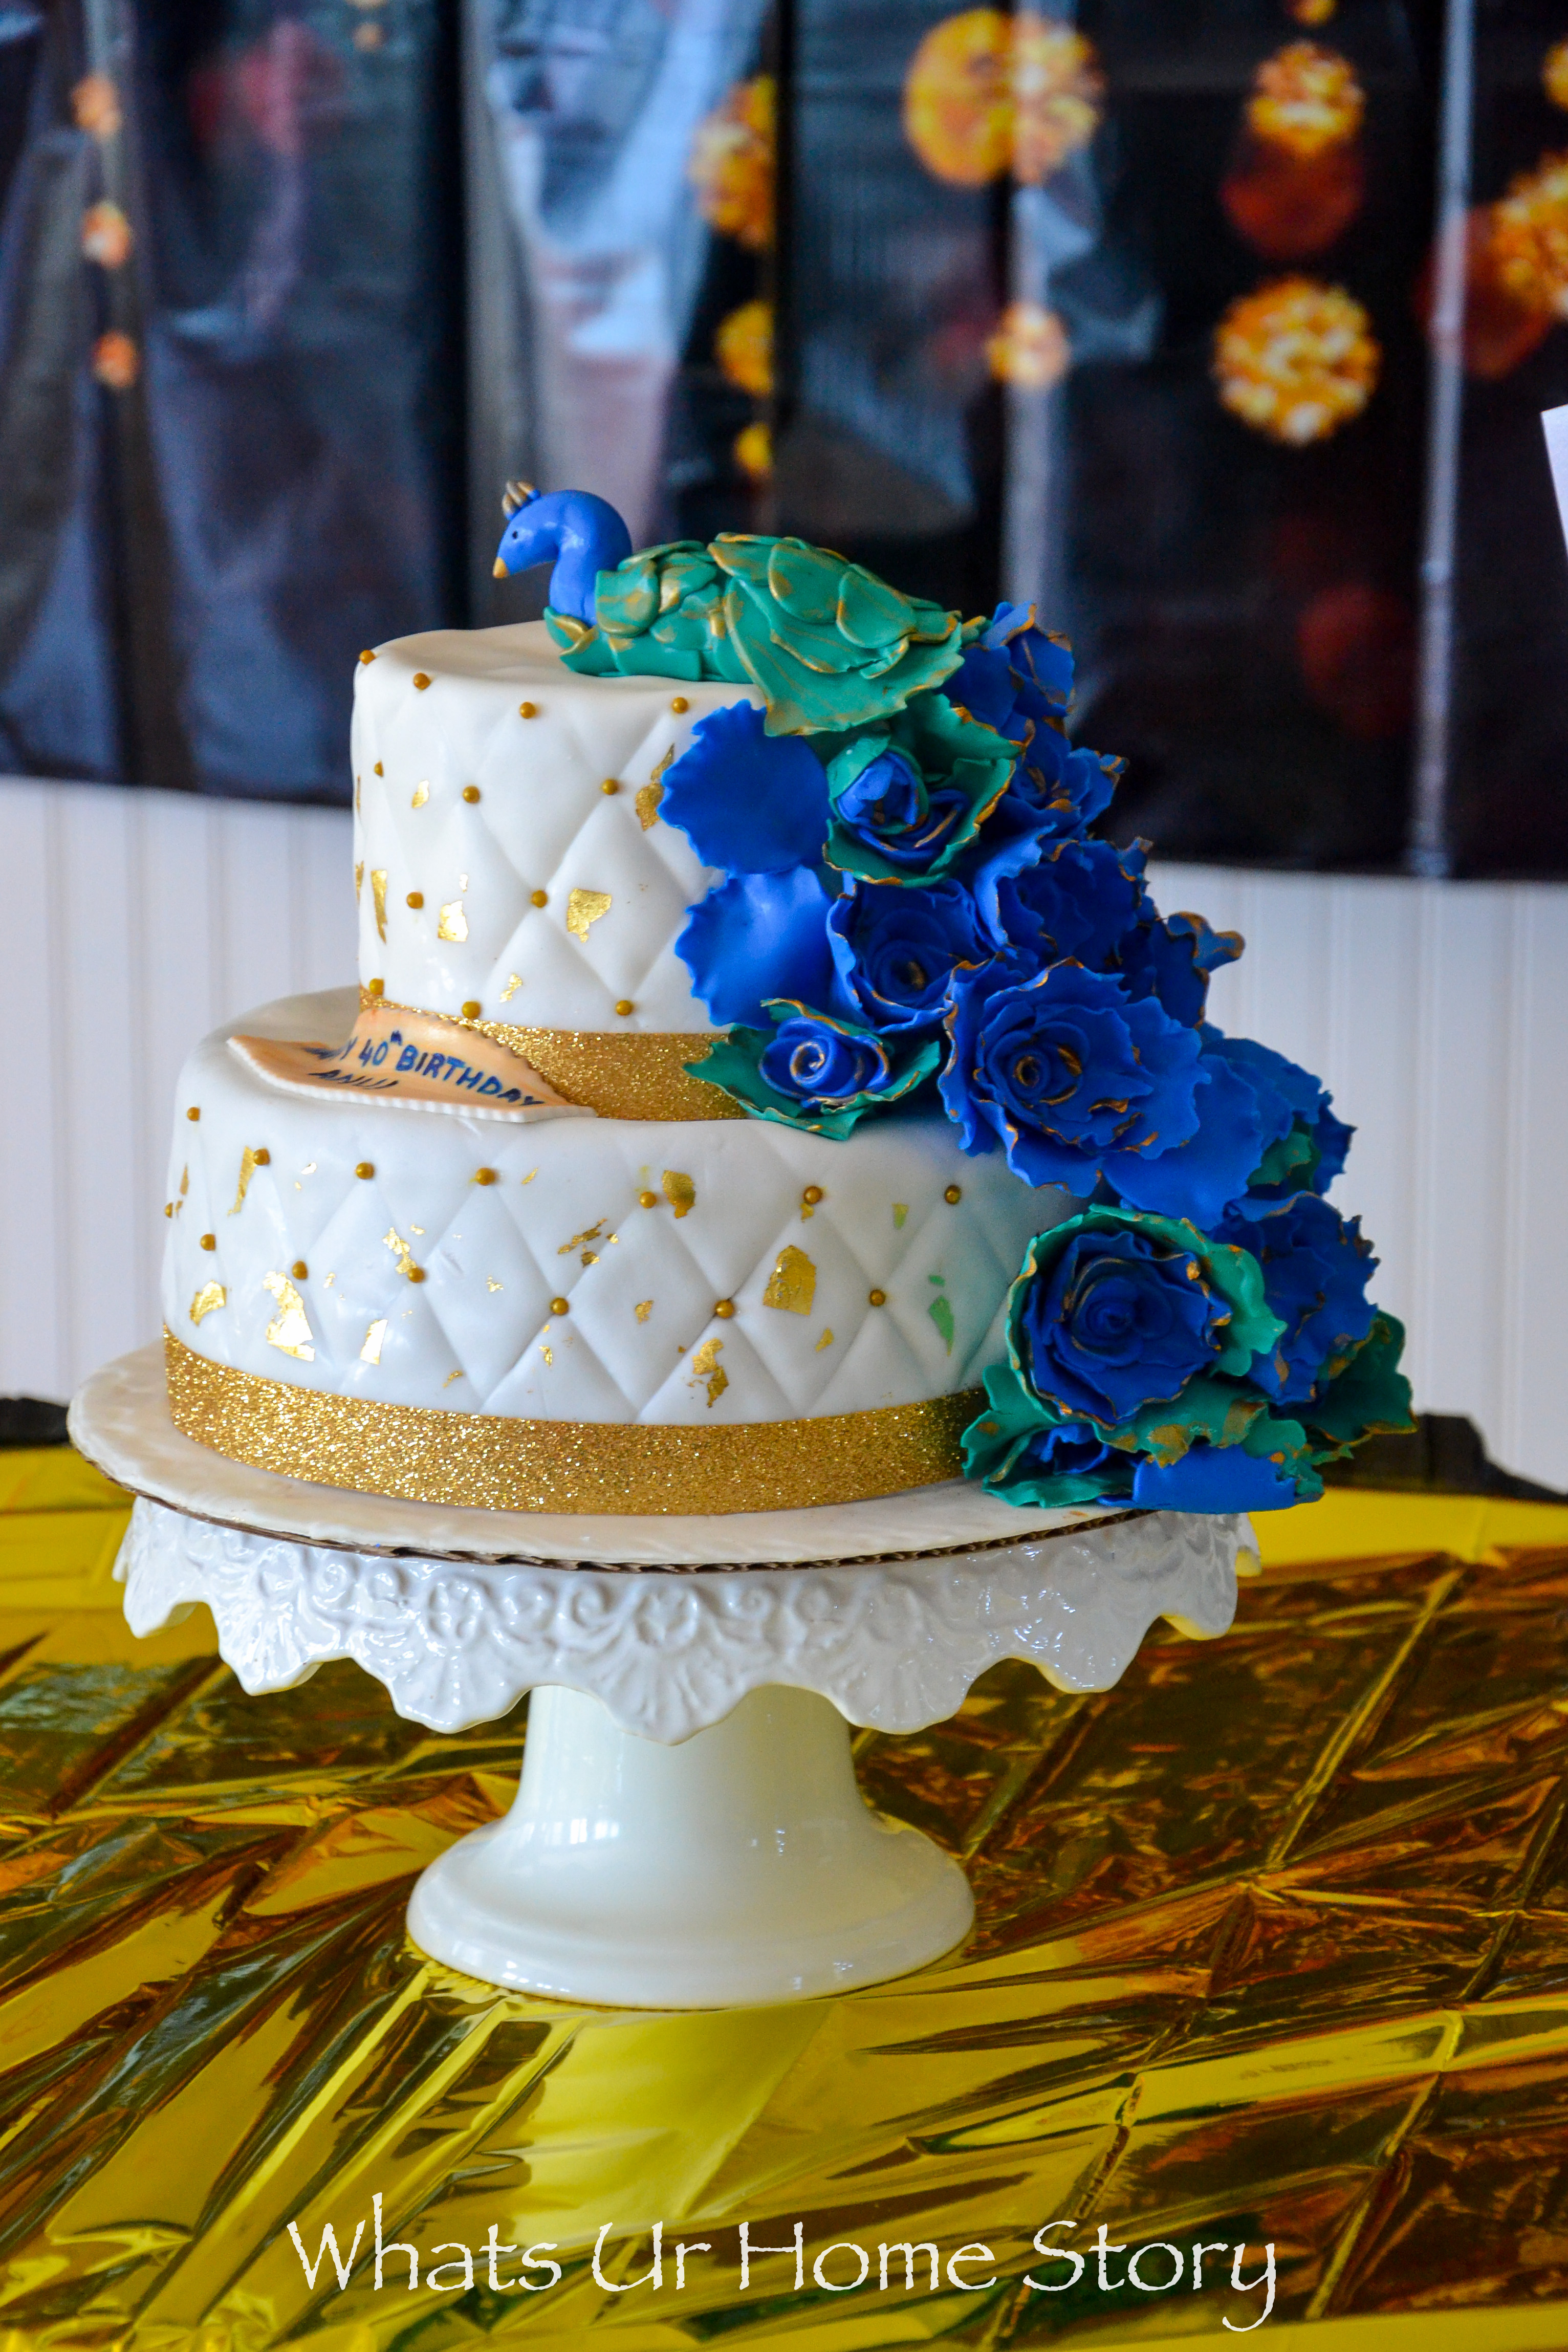 This Amazing Peacock Wedding Cake Uses Cupcakes For The Tail | Home Design,  Garden & Architecture Blog Magazine